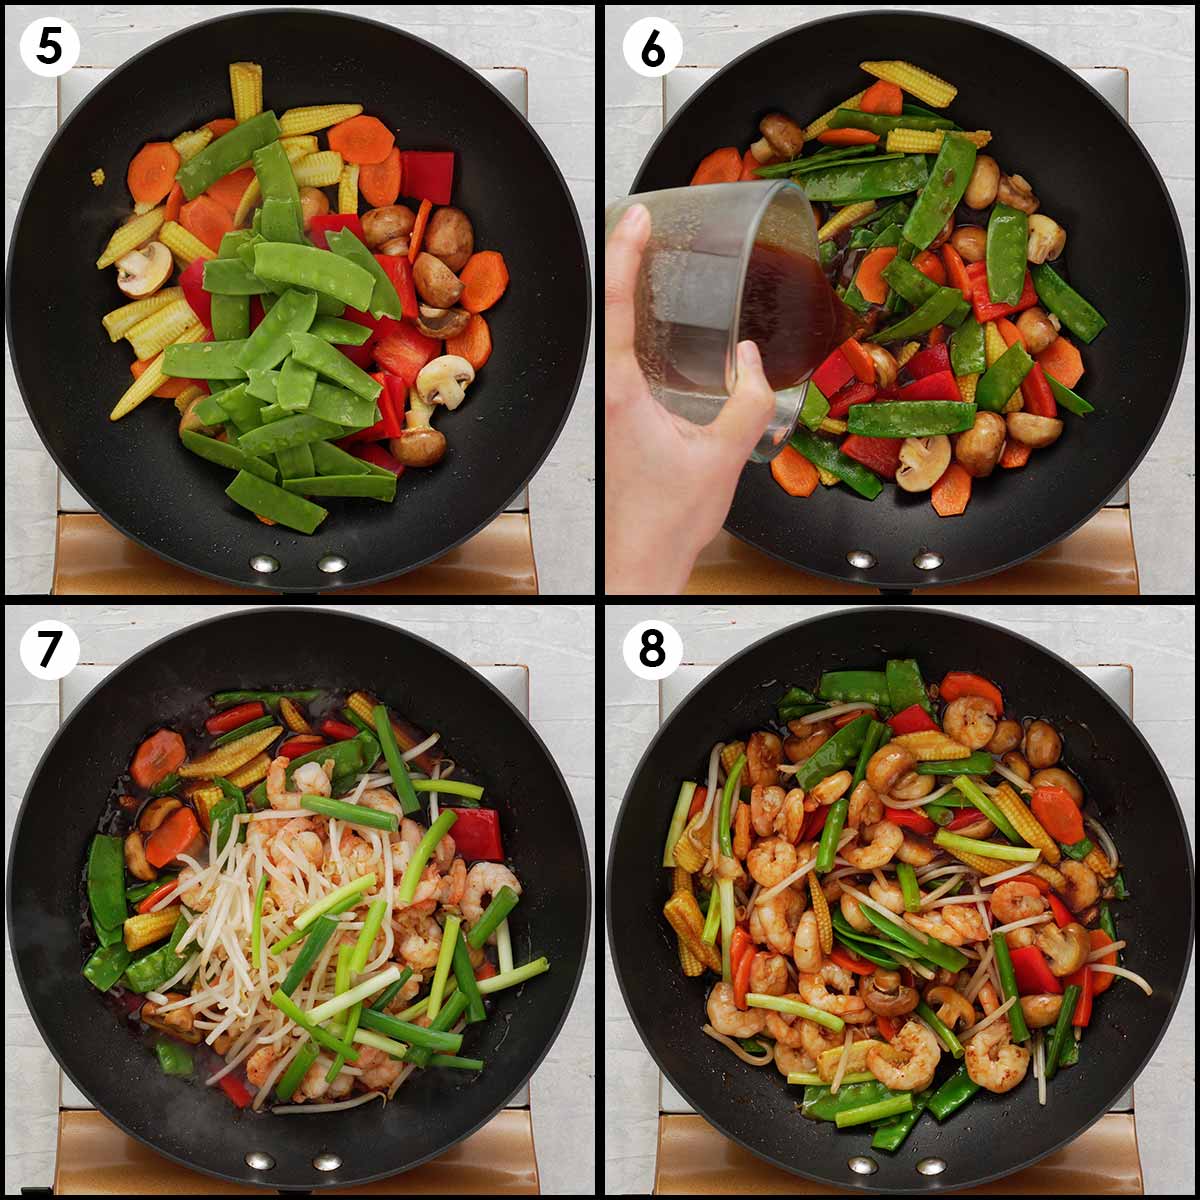 4 image collage showing how to make stir fry vegetables with sauce. 